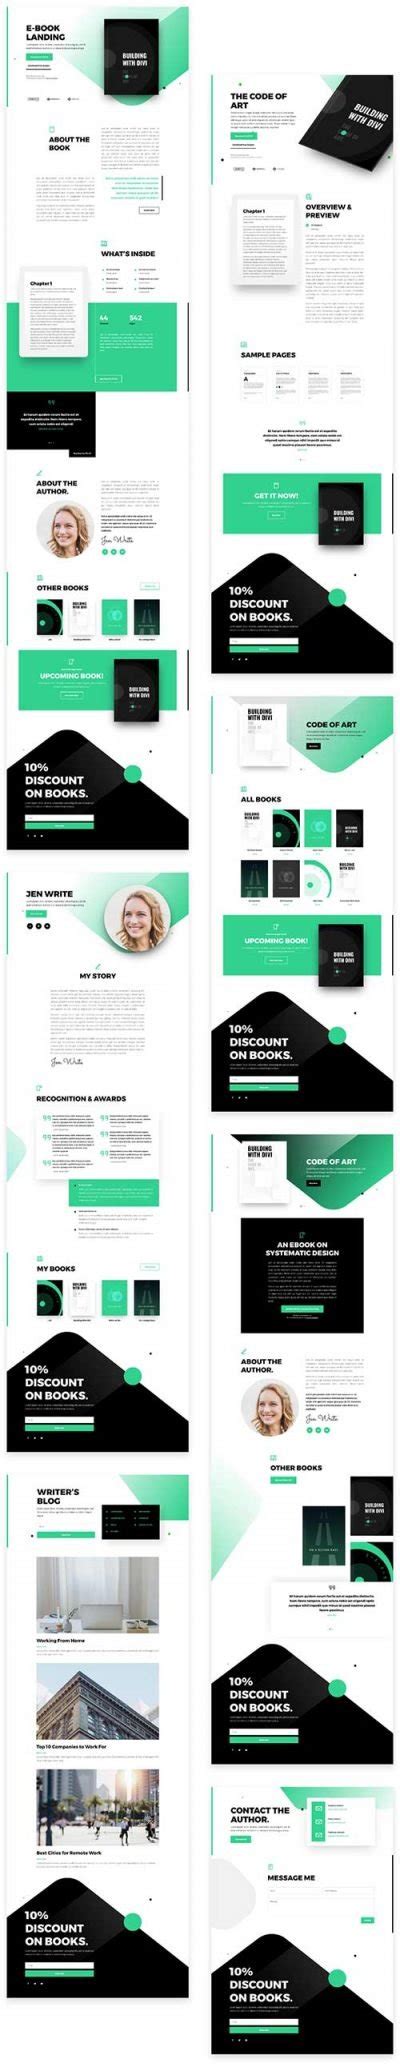 Divi Ebook Free Layout Pack • Divi Theme Layouts